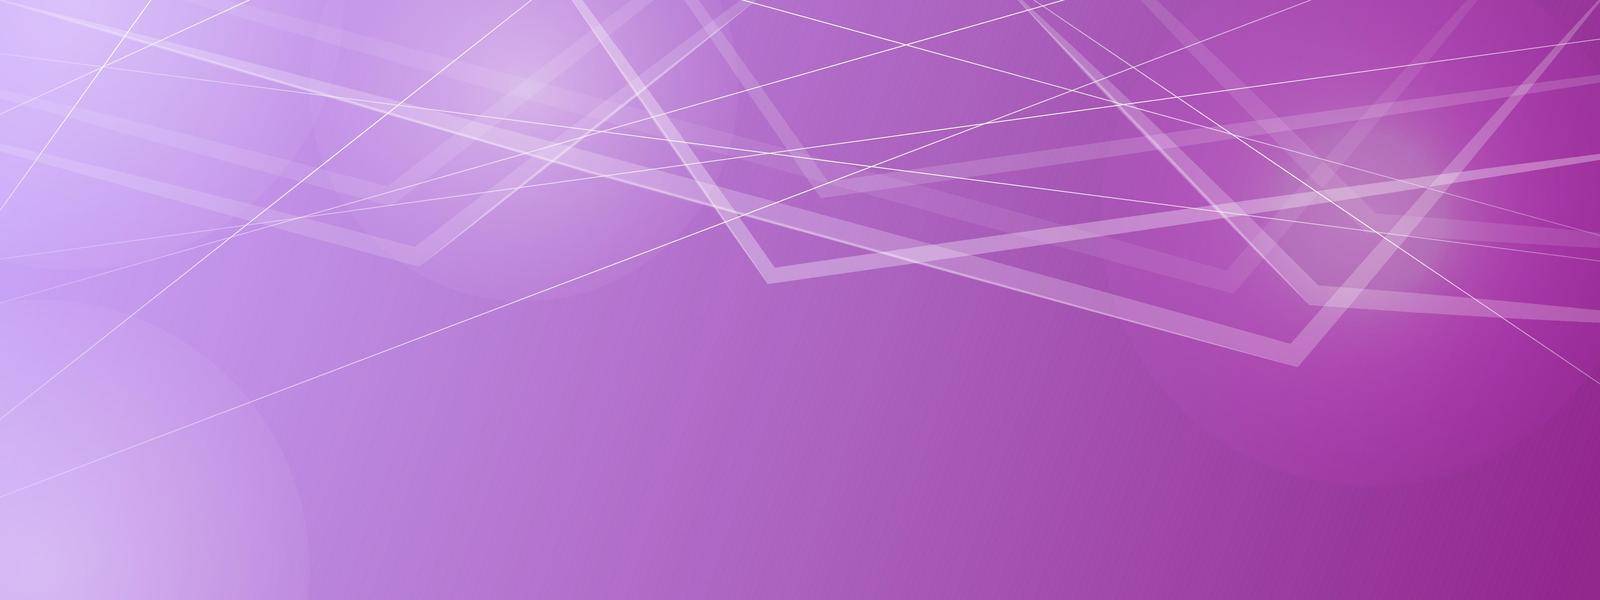 Abstract purple background with overlapping arbitrary shapes. Gradient purple background template for banners, cards, posters. Creative design. 